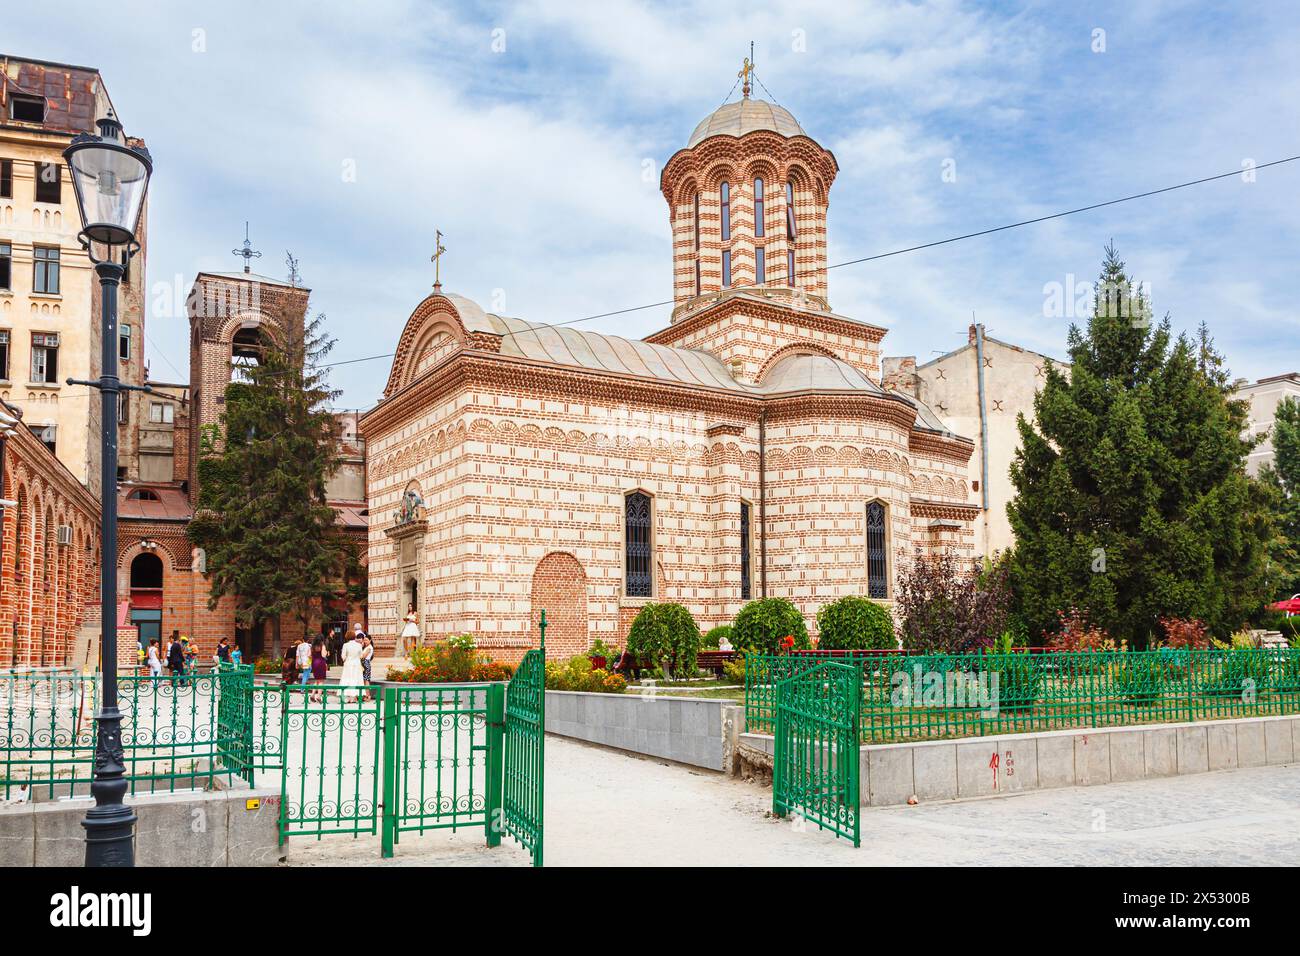 The Wallachian plastered exterior of Romanian Orthodox Curtea Veche Church, oldest in Bucharest, capital city of Romania, central Europe Stock Photo